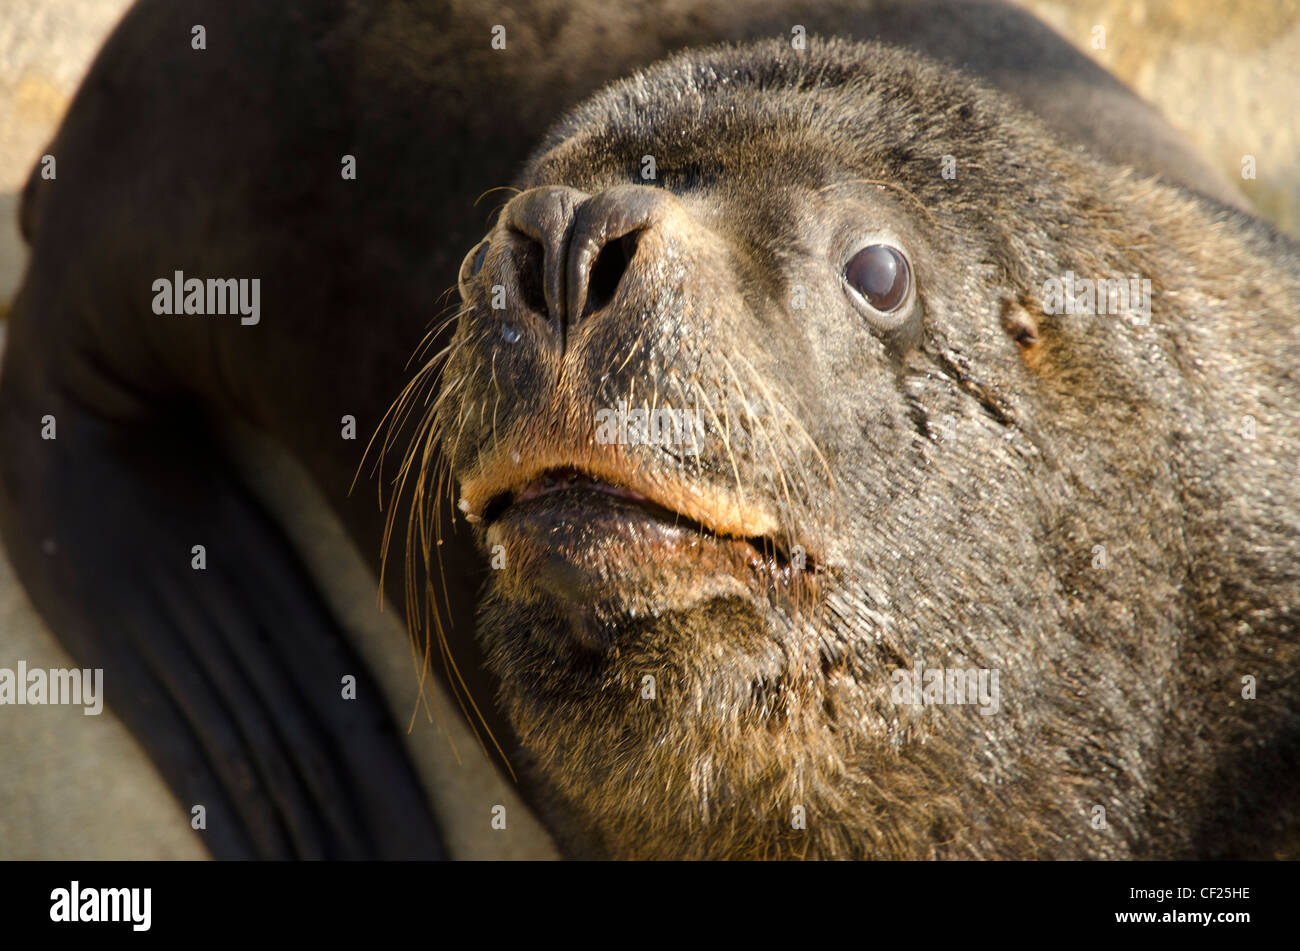 A Patagonian sea lion at the seal sanctuary in Cornwall Stock Photo